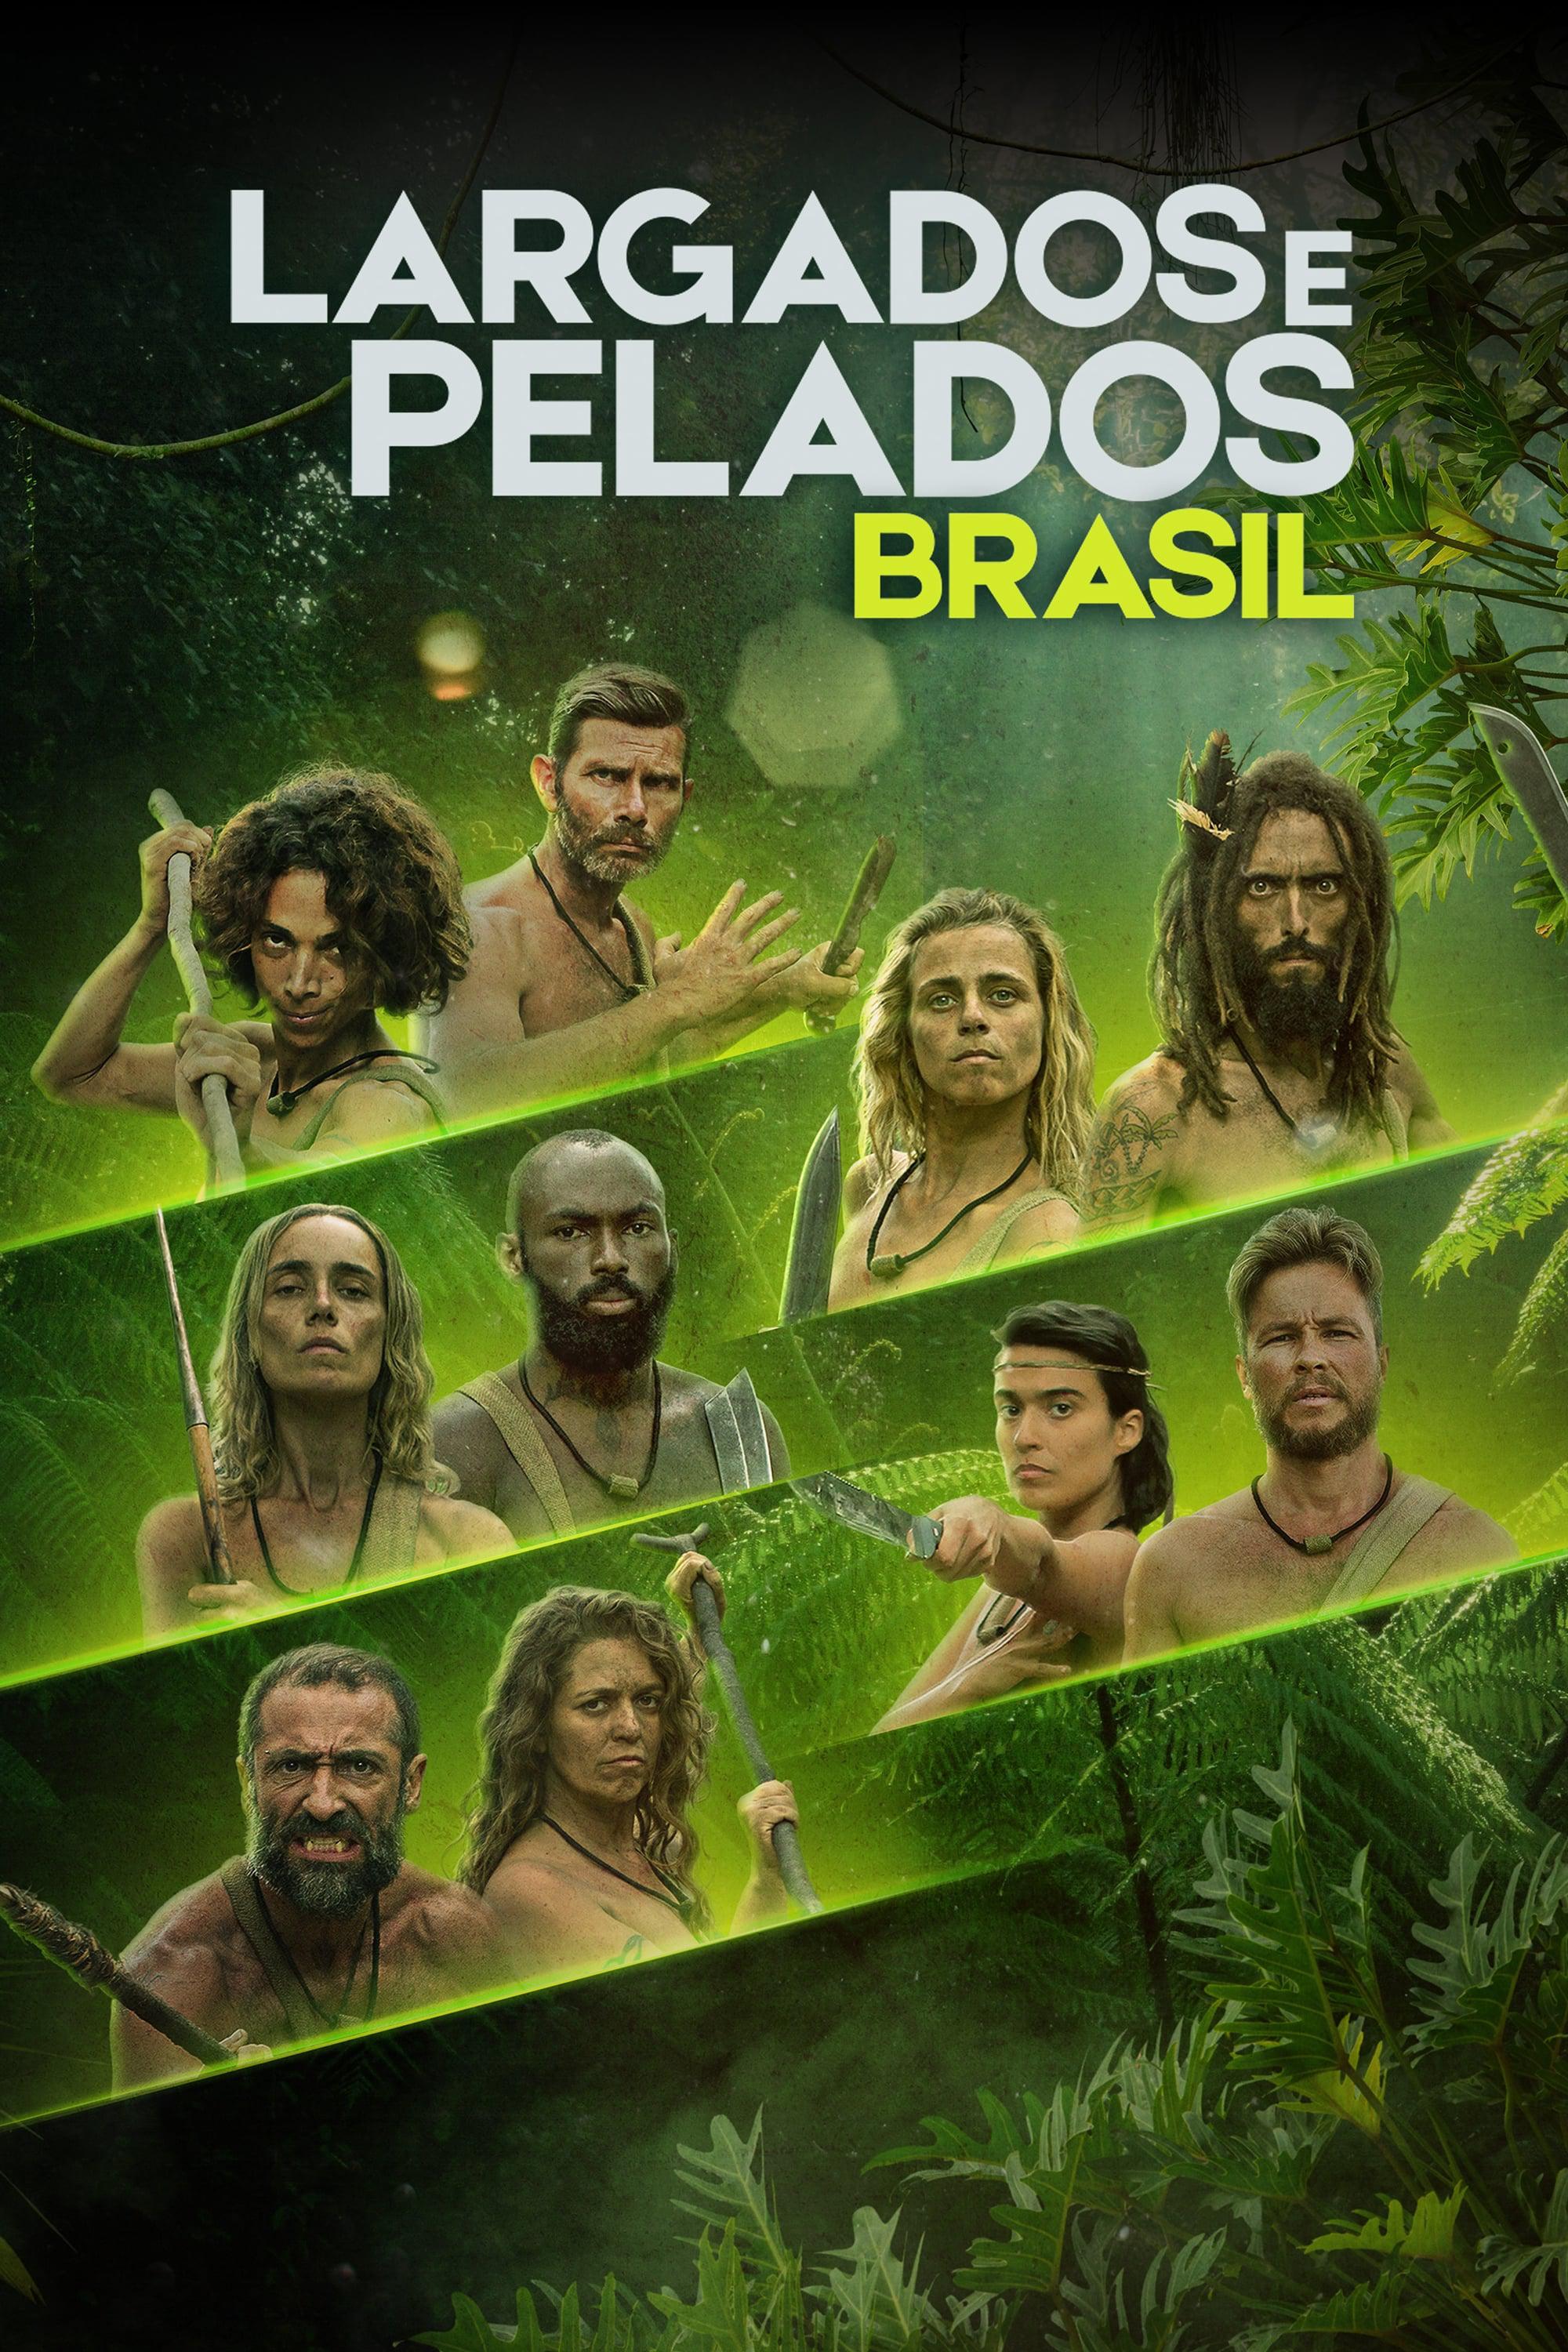 TV ratings for Naked And Afraid Brazil (Largados E Pelados Brasil) in the United States. Discovery+ TV series